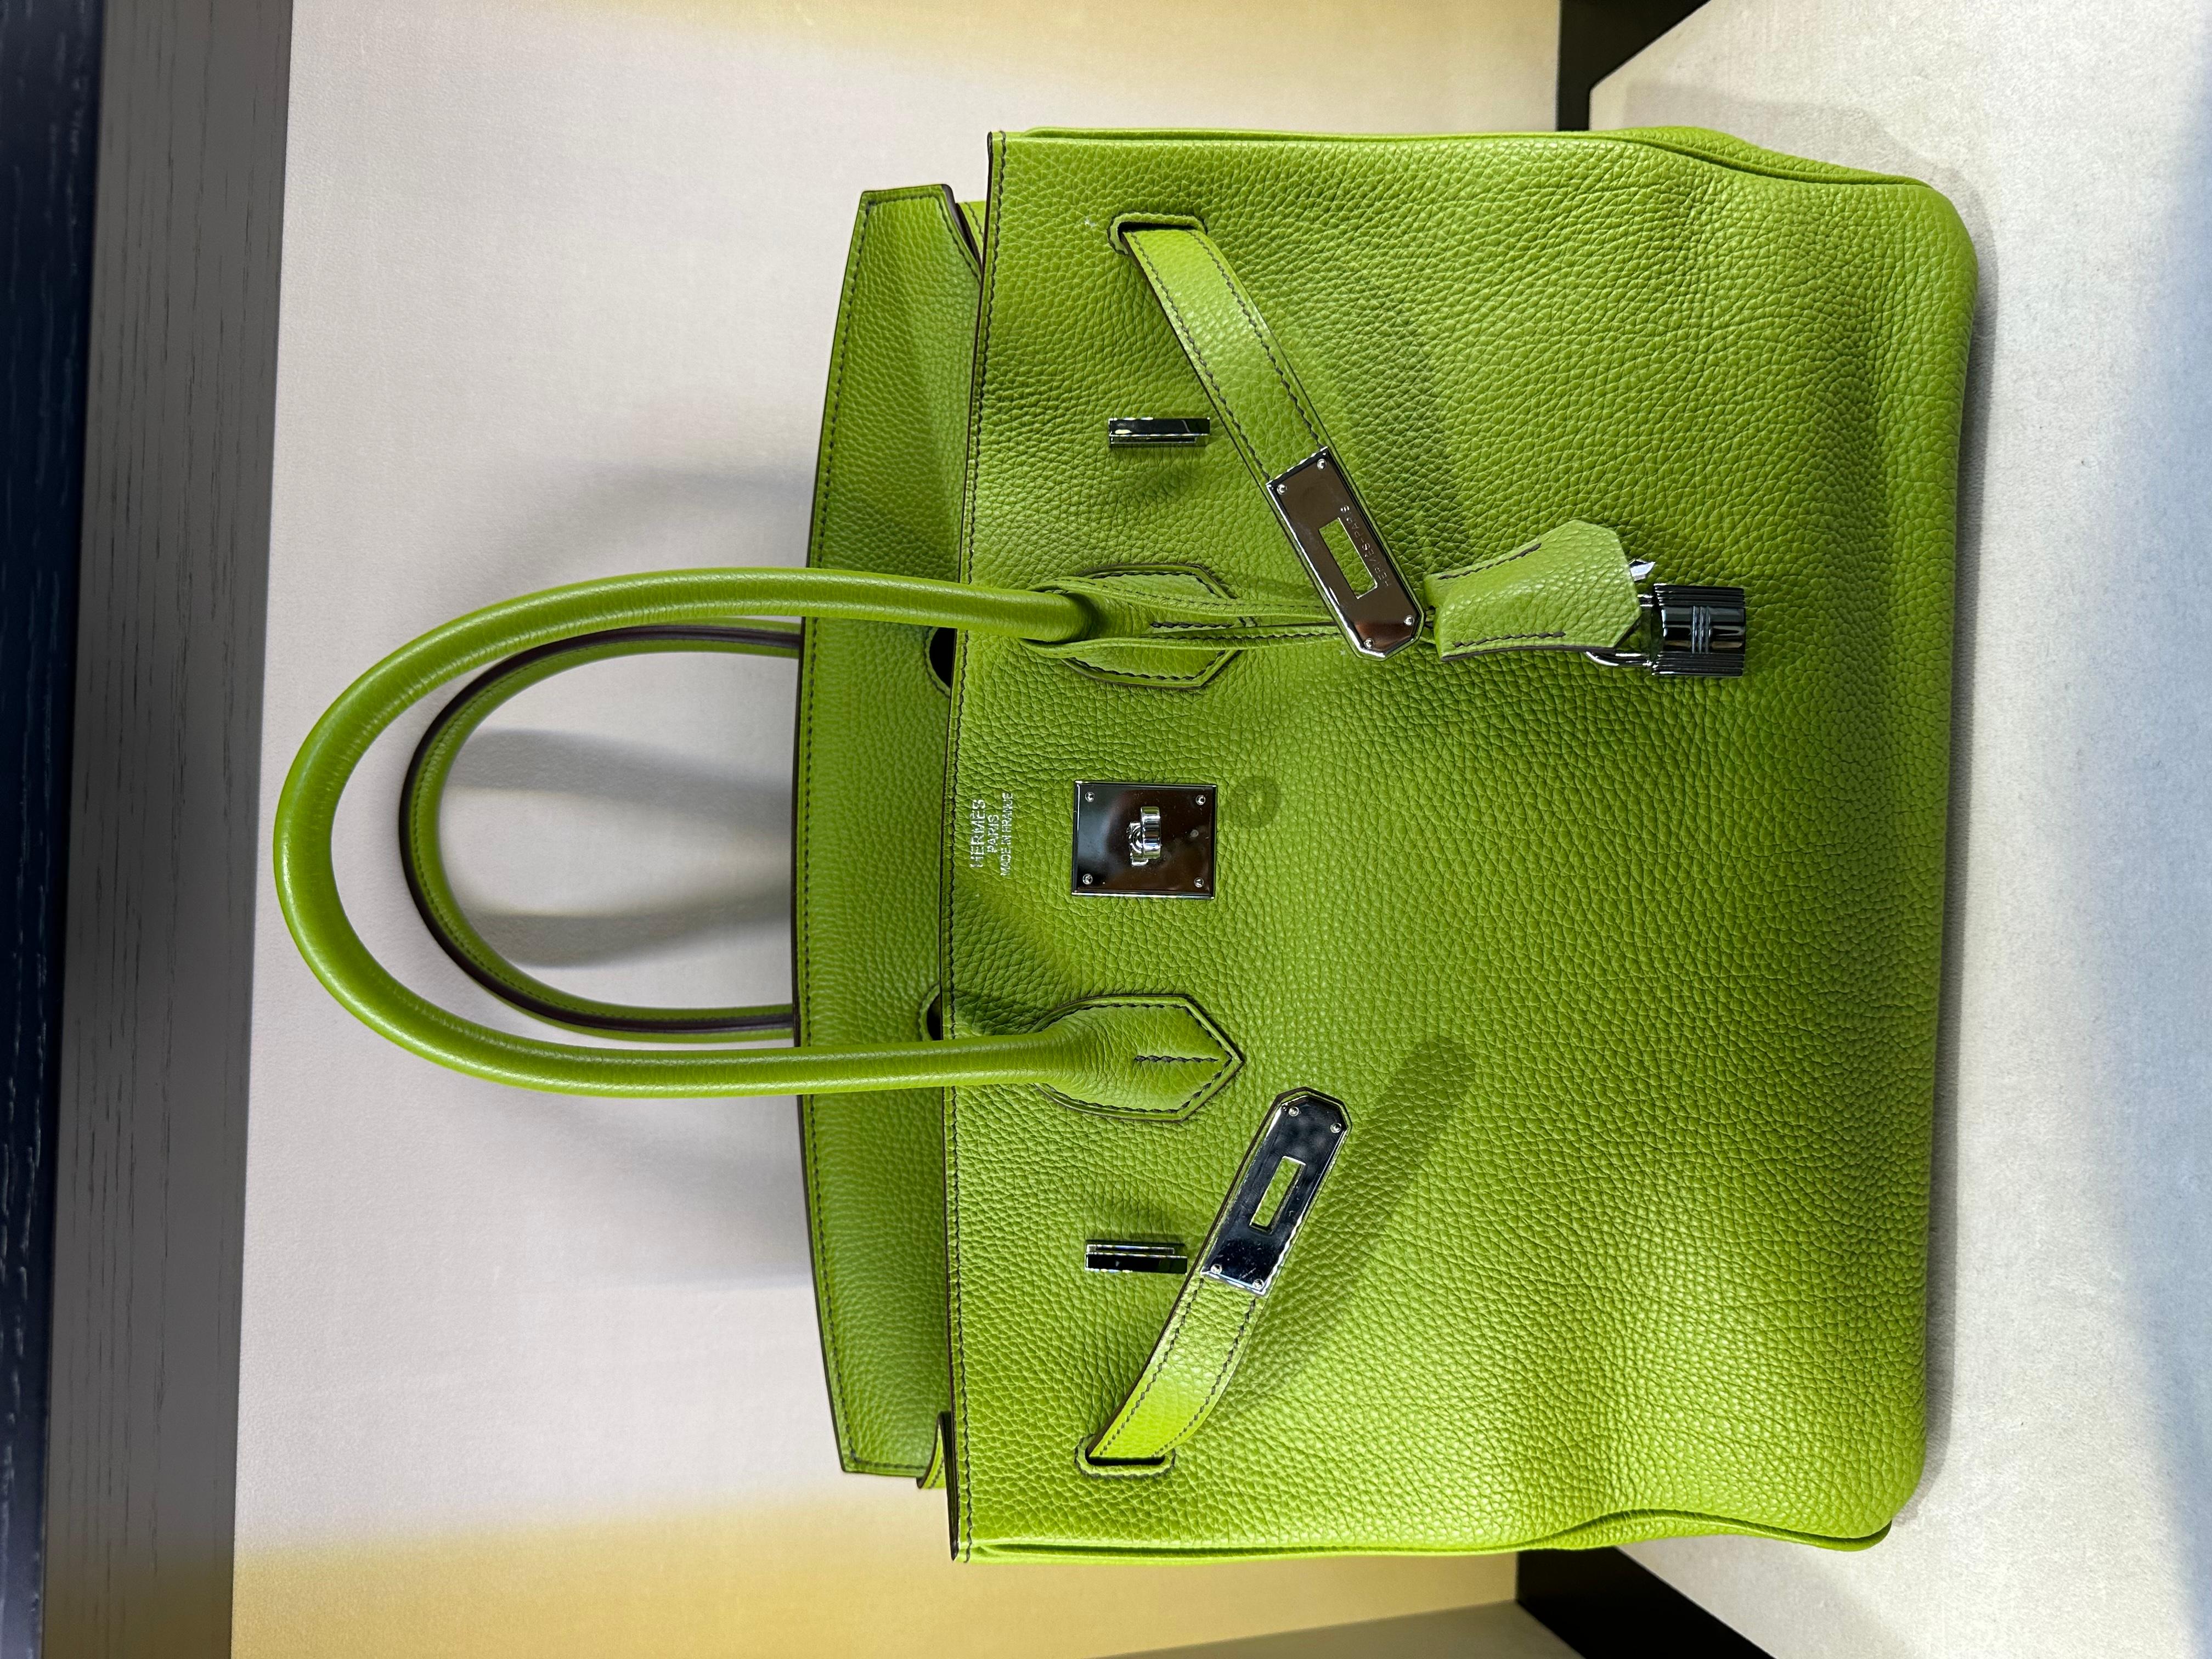 Hermes Birkin 35 Vert Anis Green Togo Birkin with PHW. L stamp 2008 with vibrant anise green togo leather, this collector's item features palladium hardware for a subtly sophisticated finish. An exquisite addition to any wardrobe.

This bag comes